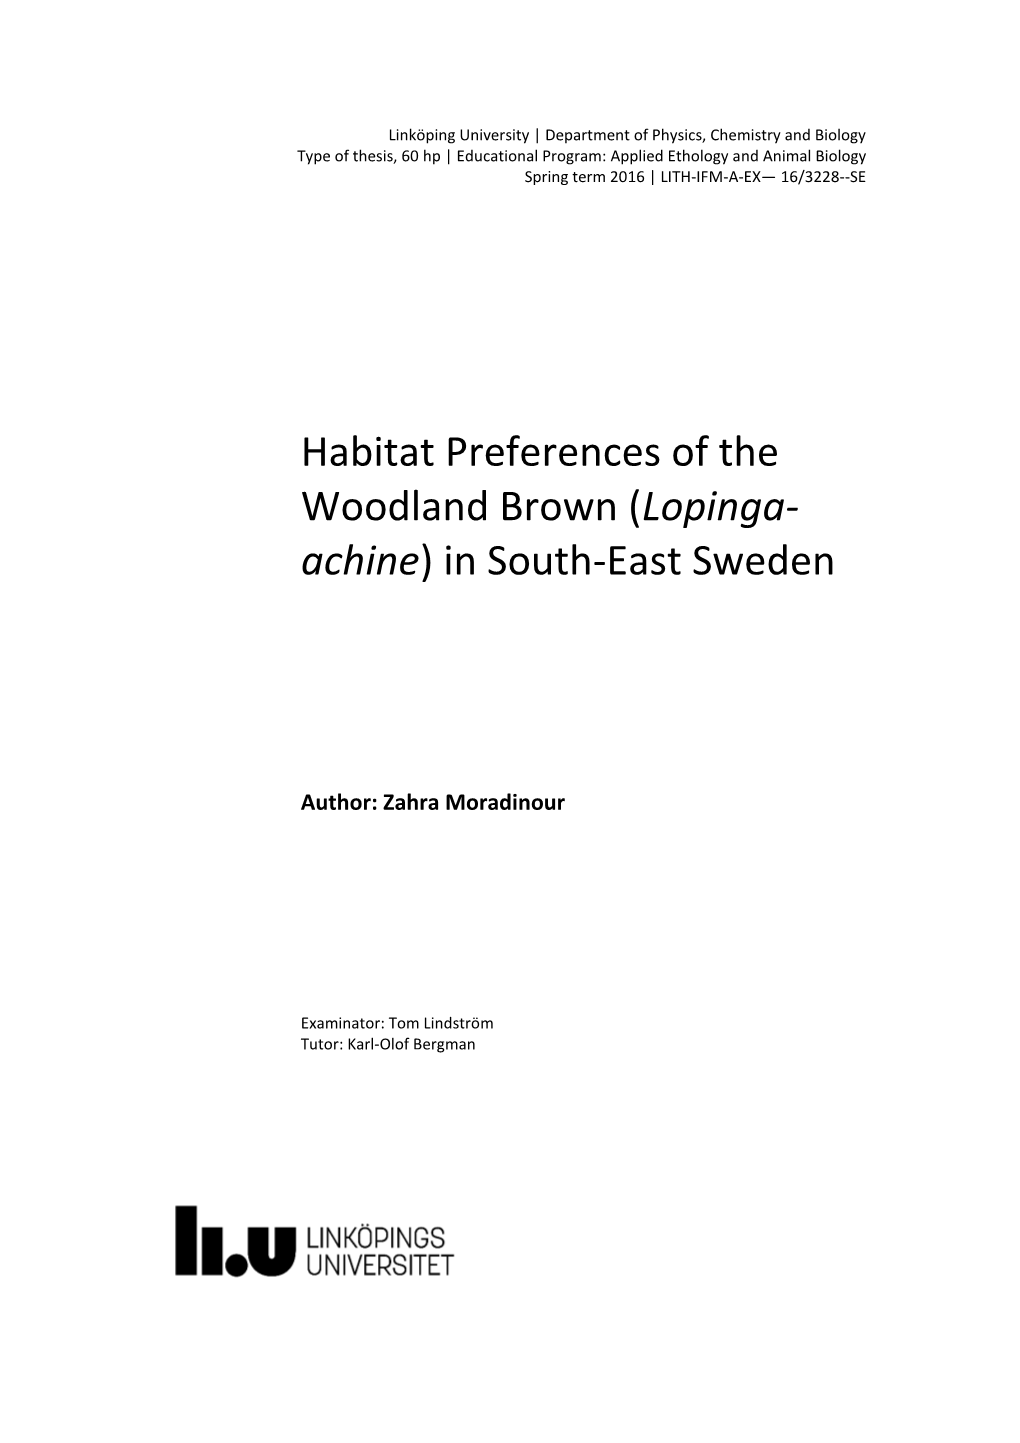 Habitat Preferences of the Woodland Brown (Lopinga- Achine) in South-East Sweden